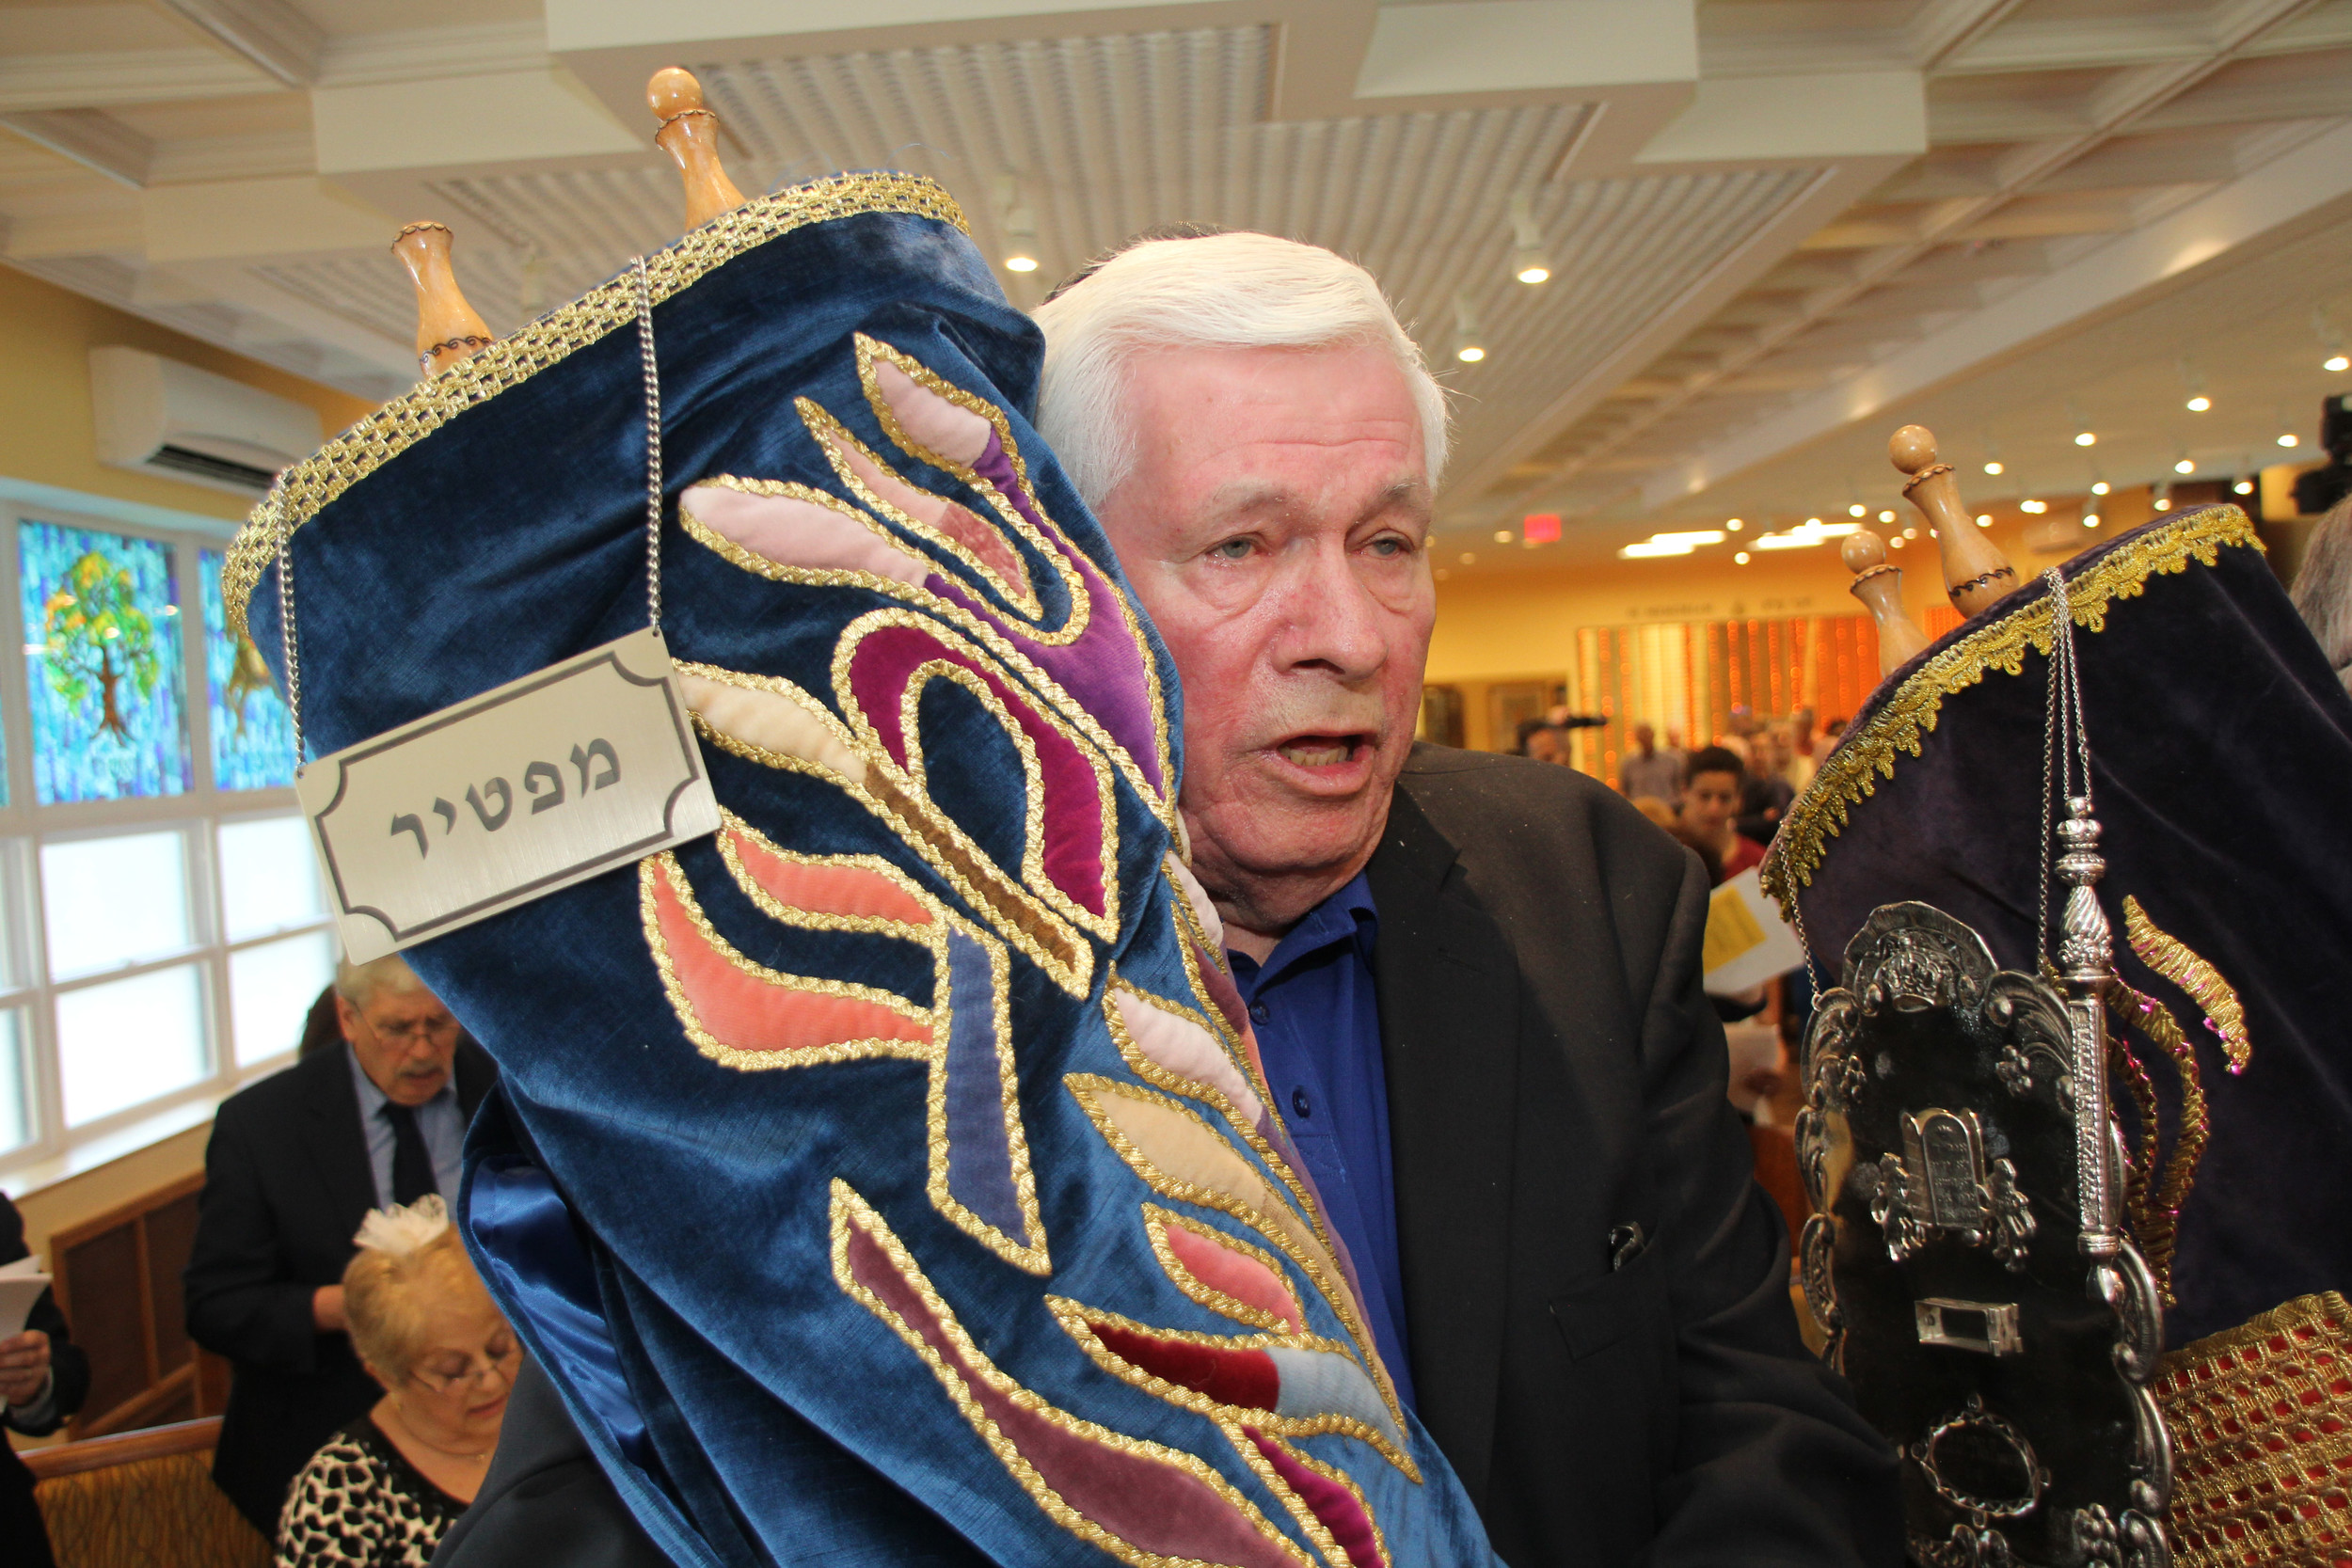 David Kamlet brought in one of the Torahs.